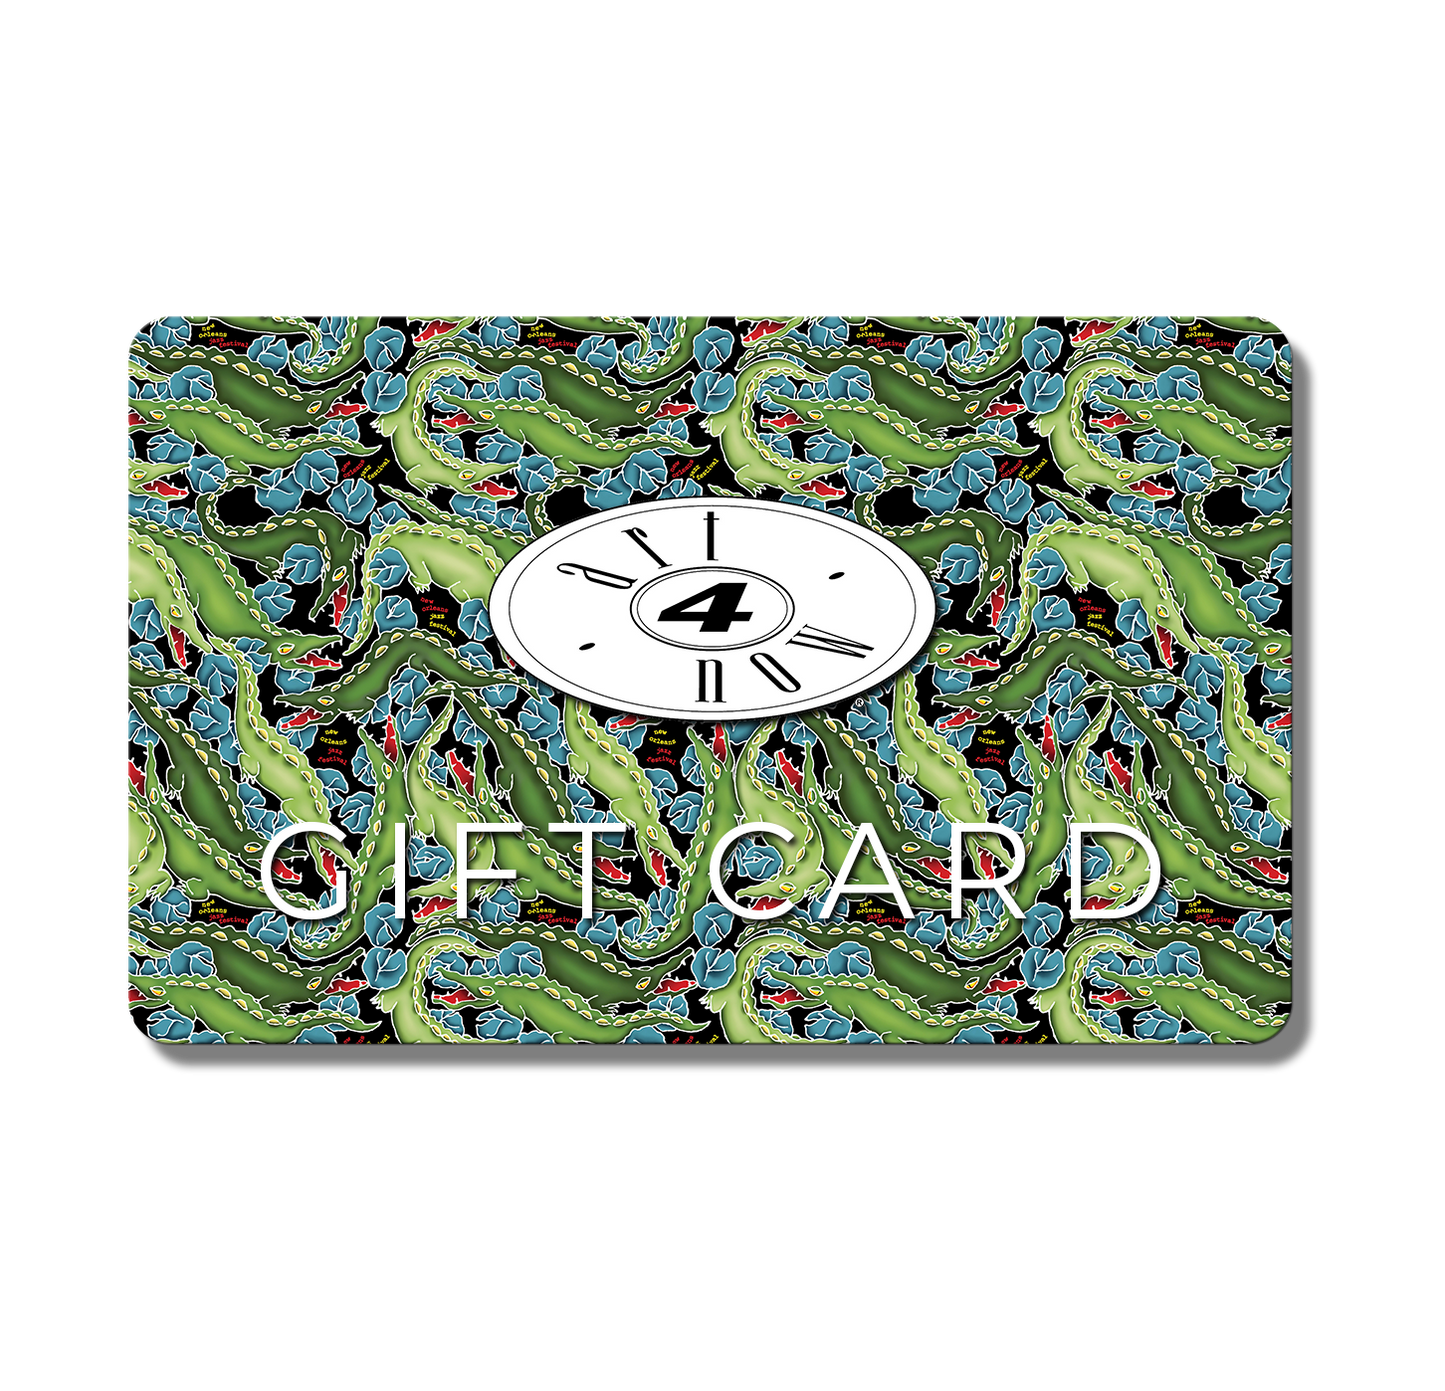 Digital Gift Cards - Art of Play